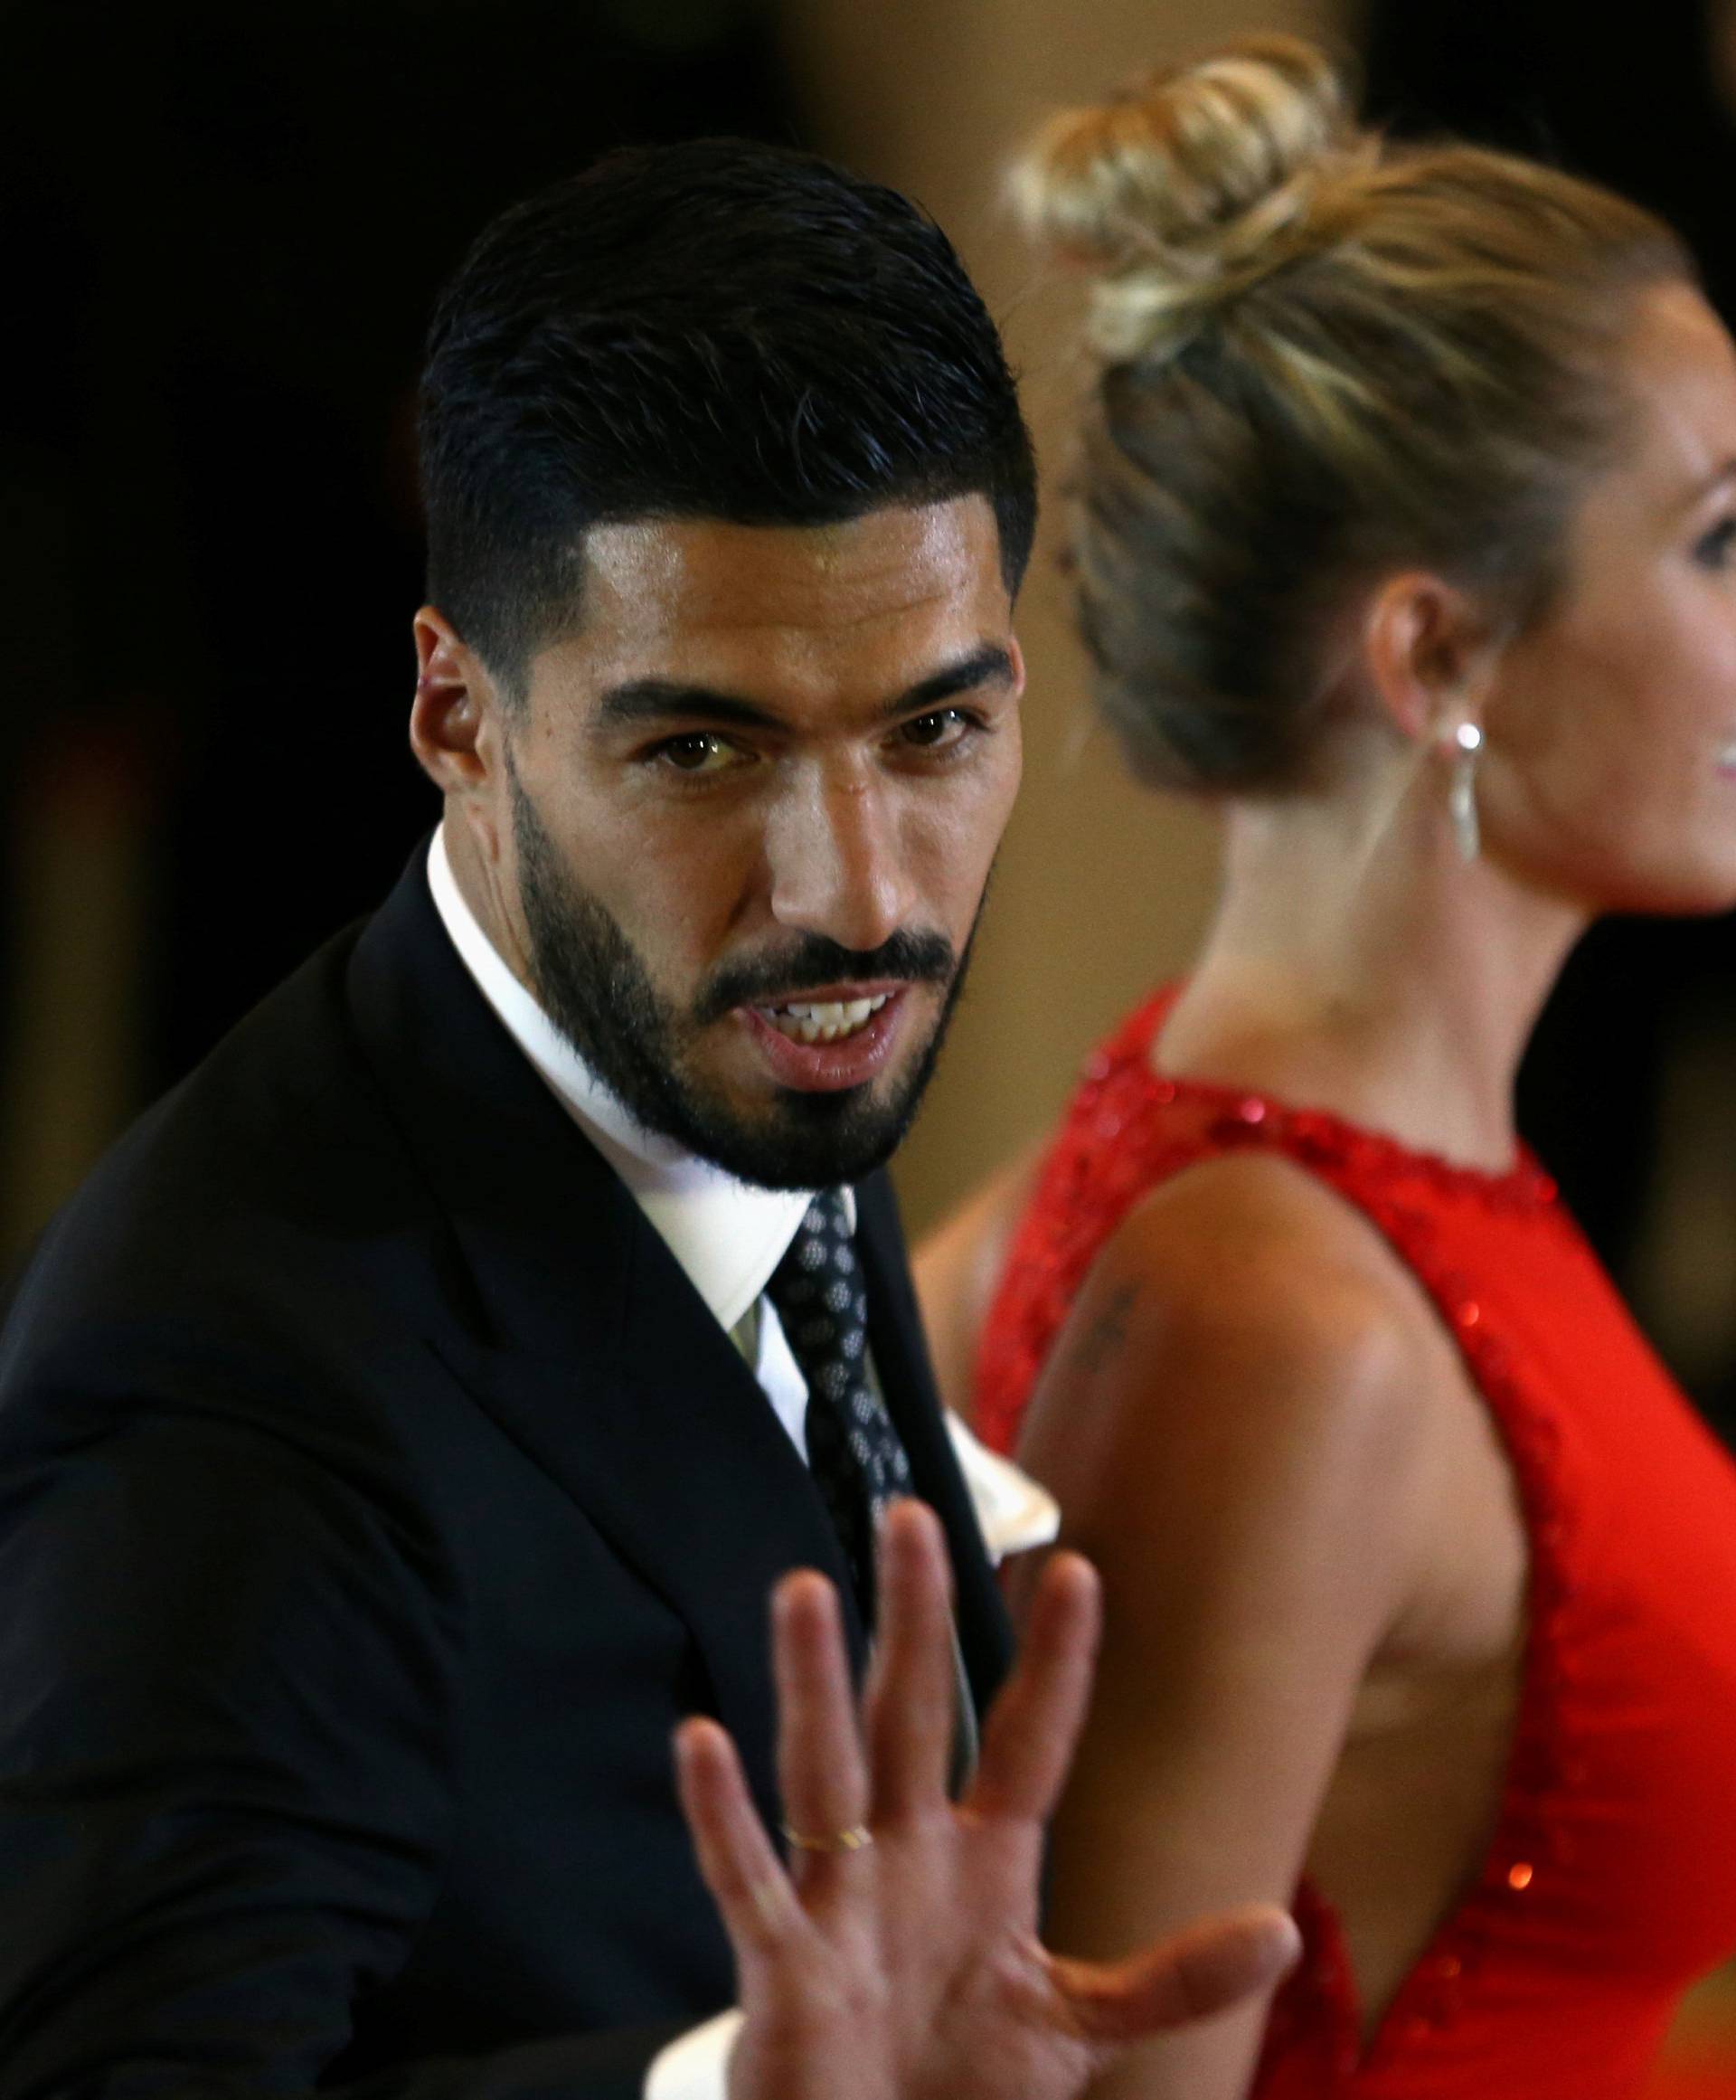 Barcelona FC's Luis Suarez, teammate of Argentine soccer player Lionel Messi, gestures next to his wife Sofia Balbi as they pose for photographers as they arrive at the wedding of Messi and Antonela Roccuzzo in Rosario